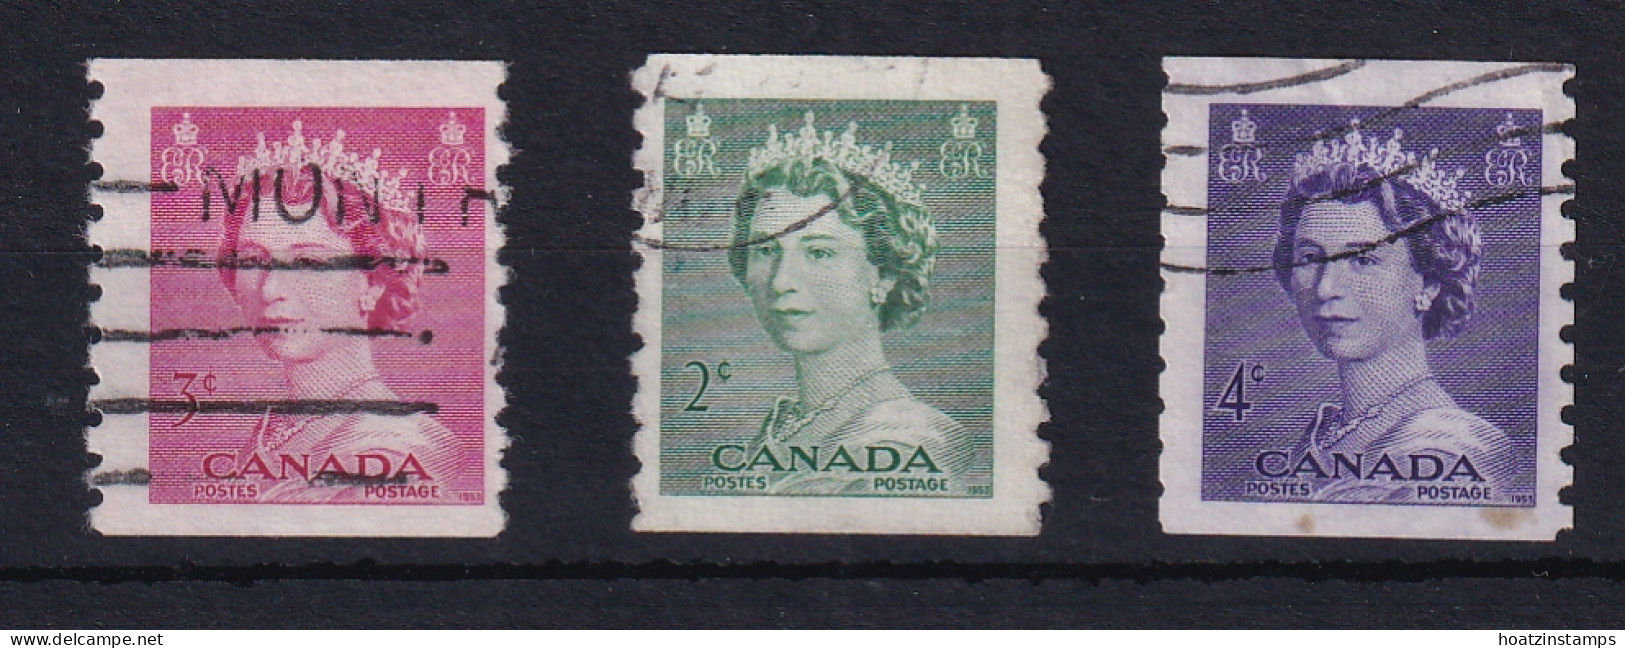 Canada: 1953   QE II - Coil Stamps Set   SG455-457  [Imperf X 9½]   Used - Used Stamps